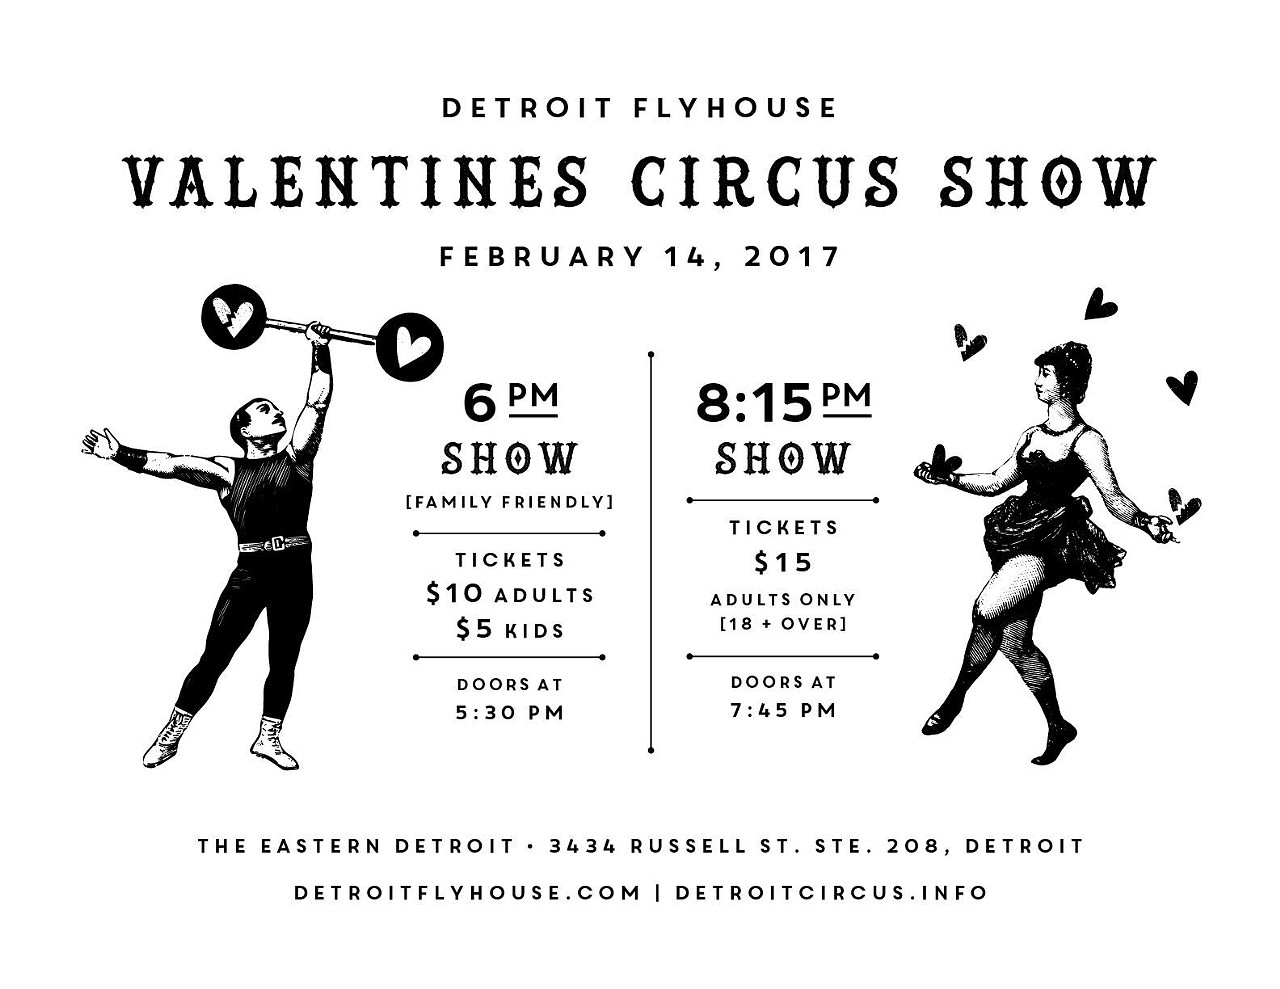 Tuesday, 2/14
Valentine&#146;s Day Circus
@ Flyhouse Detroit, The Eastern
Anyone who has ever seen the Flyhouse players perform know that plenty of aerial acrobatics, fire-dancing, stilt-walking, juggling, and more are in store. The troupe have two Valentine&#146;s Day shows planned: a family-friendly version at 6 p.m., and an adult (18 and older only) version at 8:15 p.m. This show usually sells out, so get your tickets ahead of time.
Shows at 6 p.m. and 8:15 p.m.; doors open 30 minutes before show; 3434 Russell St., Detroit, Ste. 208; detroitcircus.info; tickets are $10 for adults and $5 for children for the 6 p.m. show, and $15 for the 8:15 p.m. show.